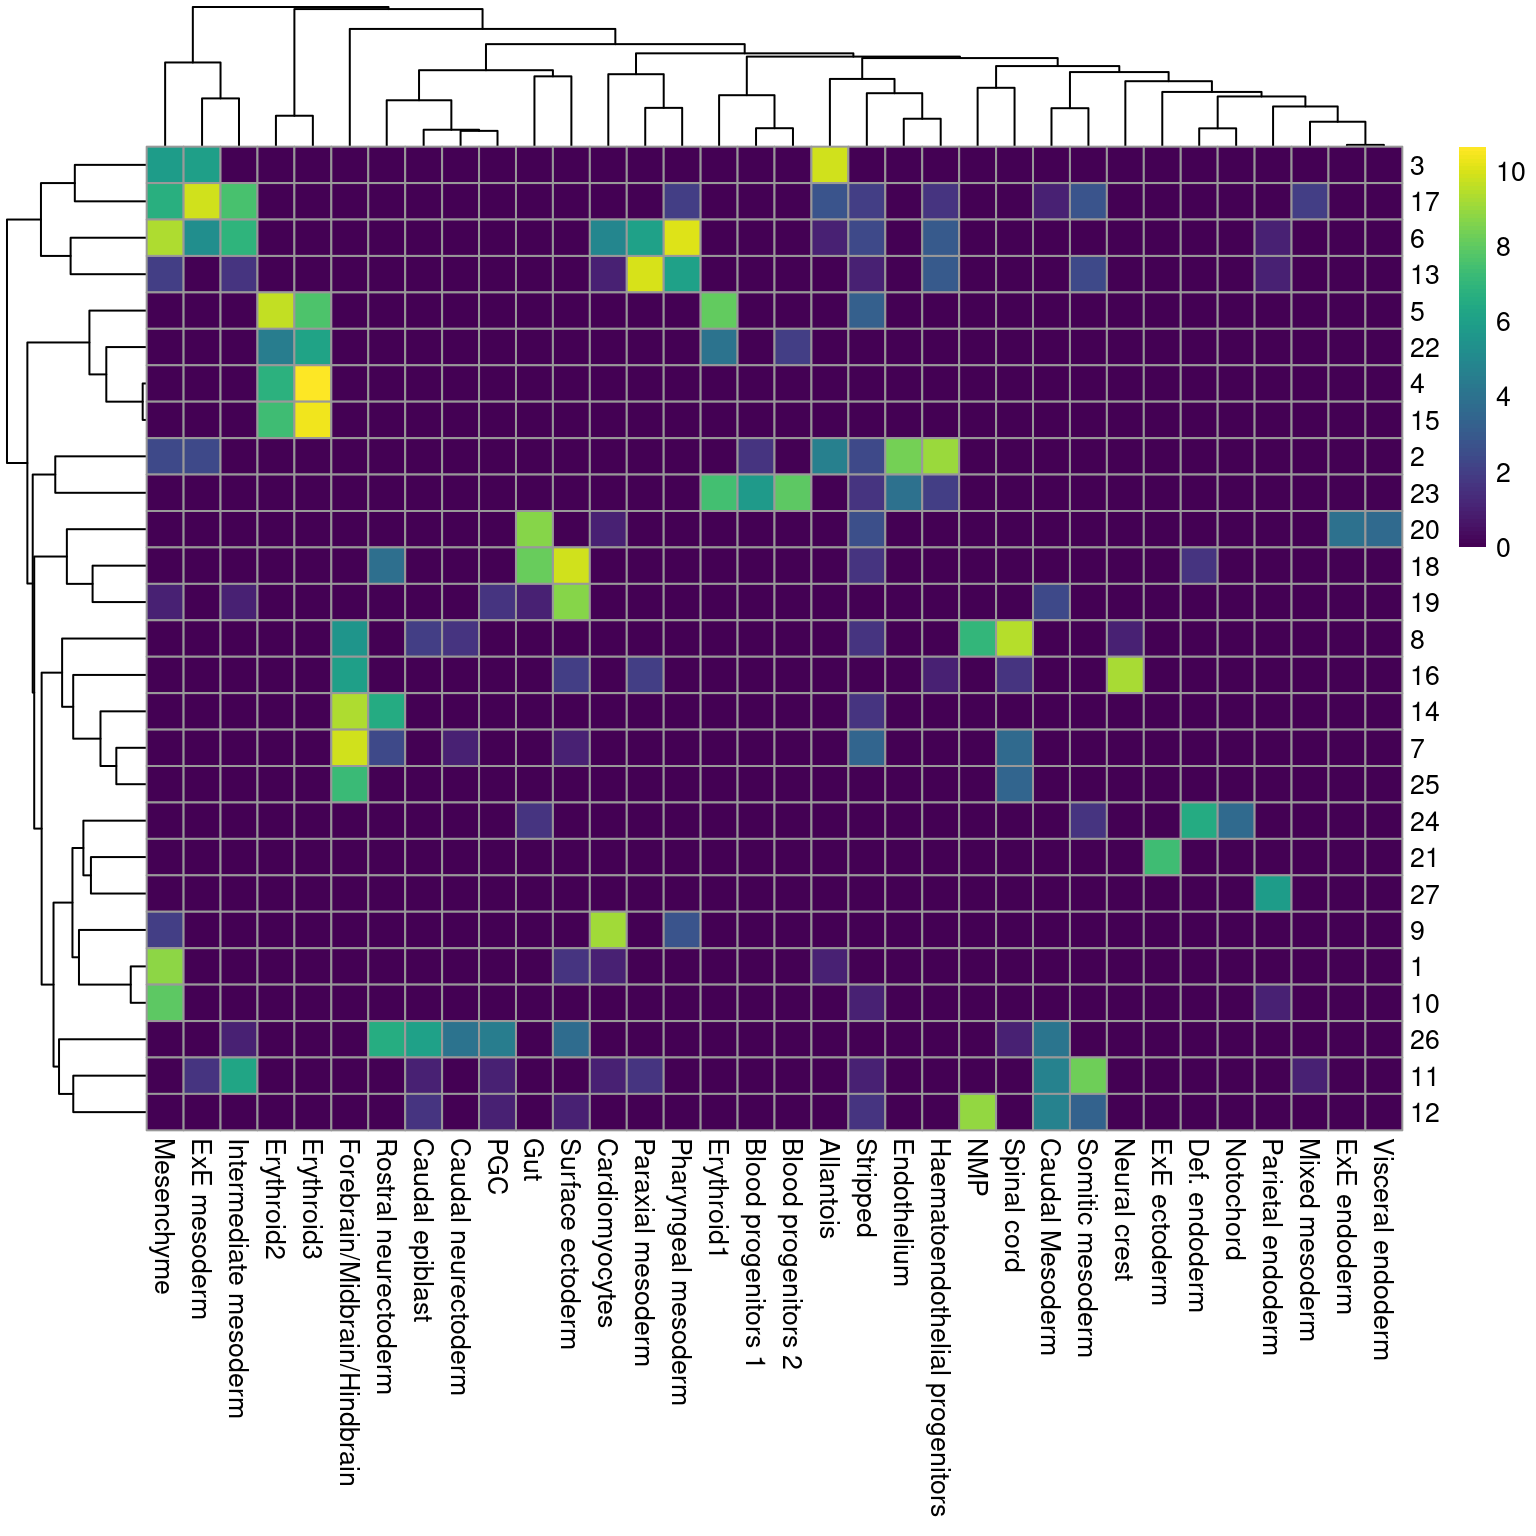 Heatmap showing the abundance of cells with each combination of cluster (row) and cell type label (column). The color scale represents the log~2~-count for each combination.